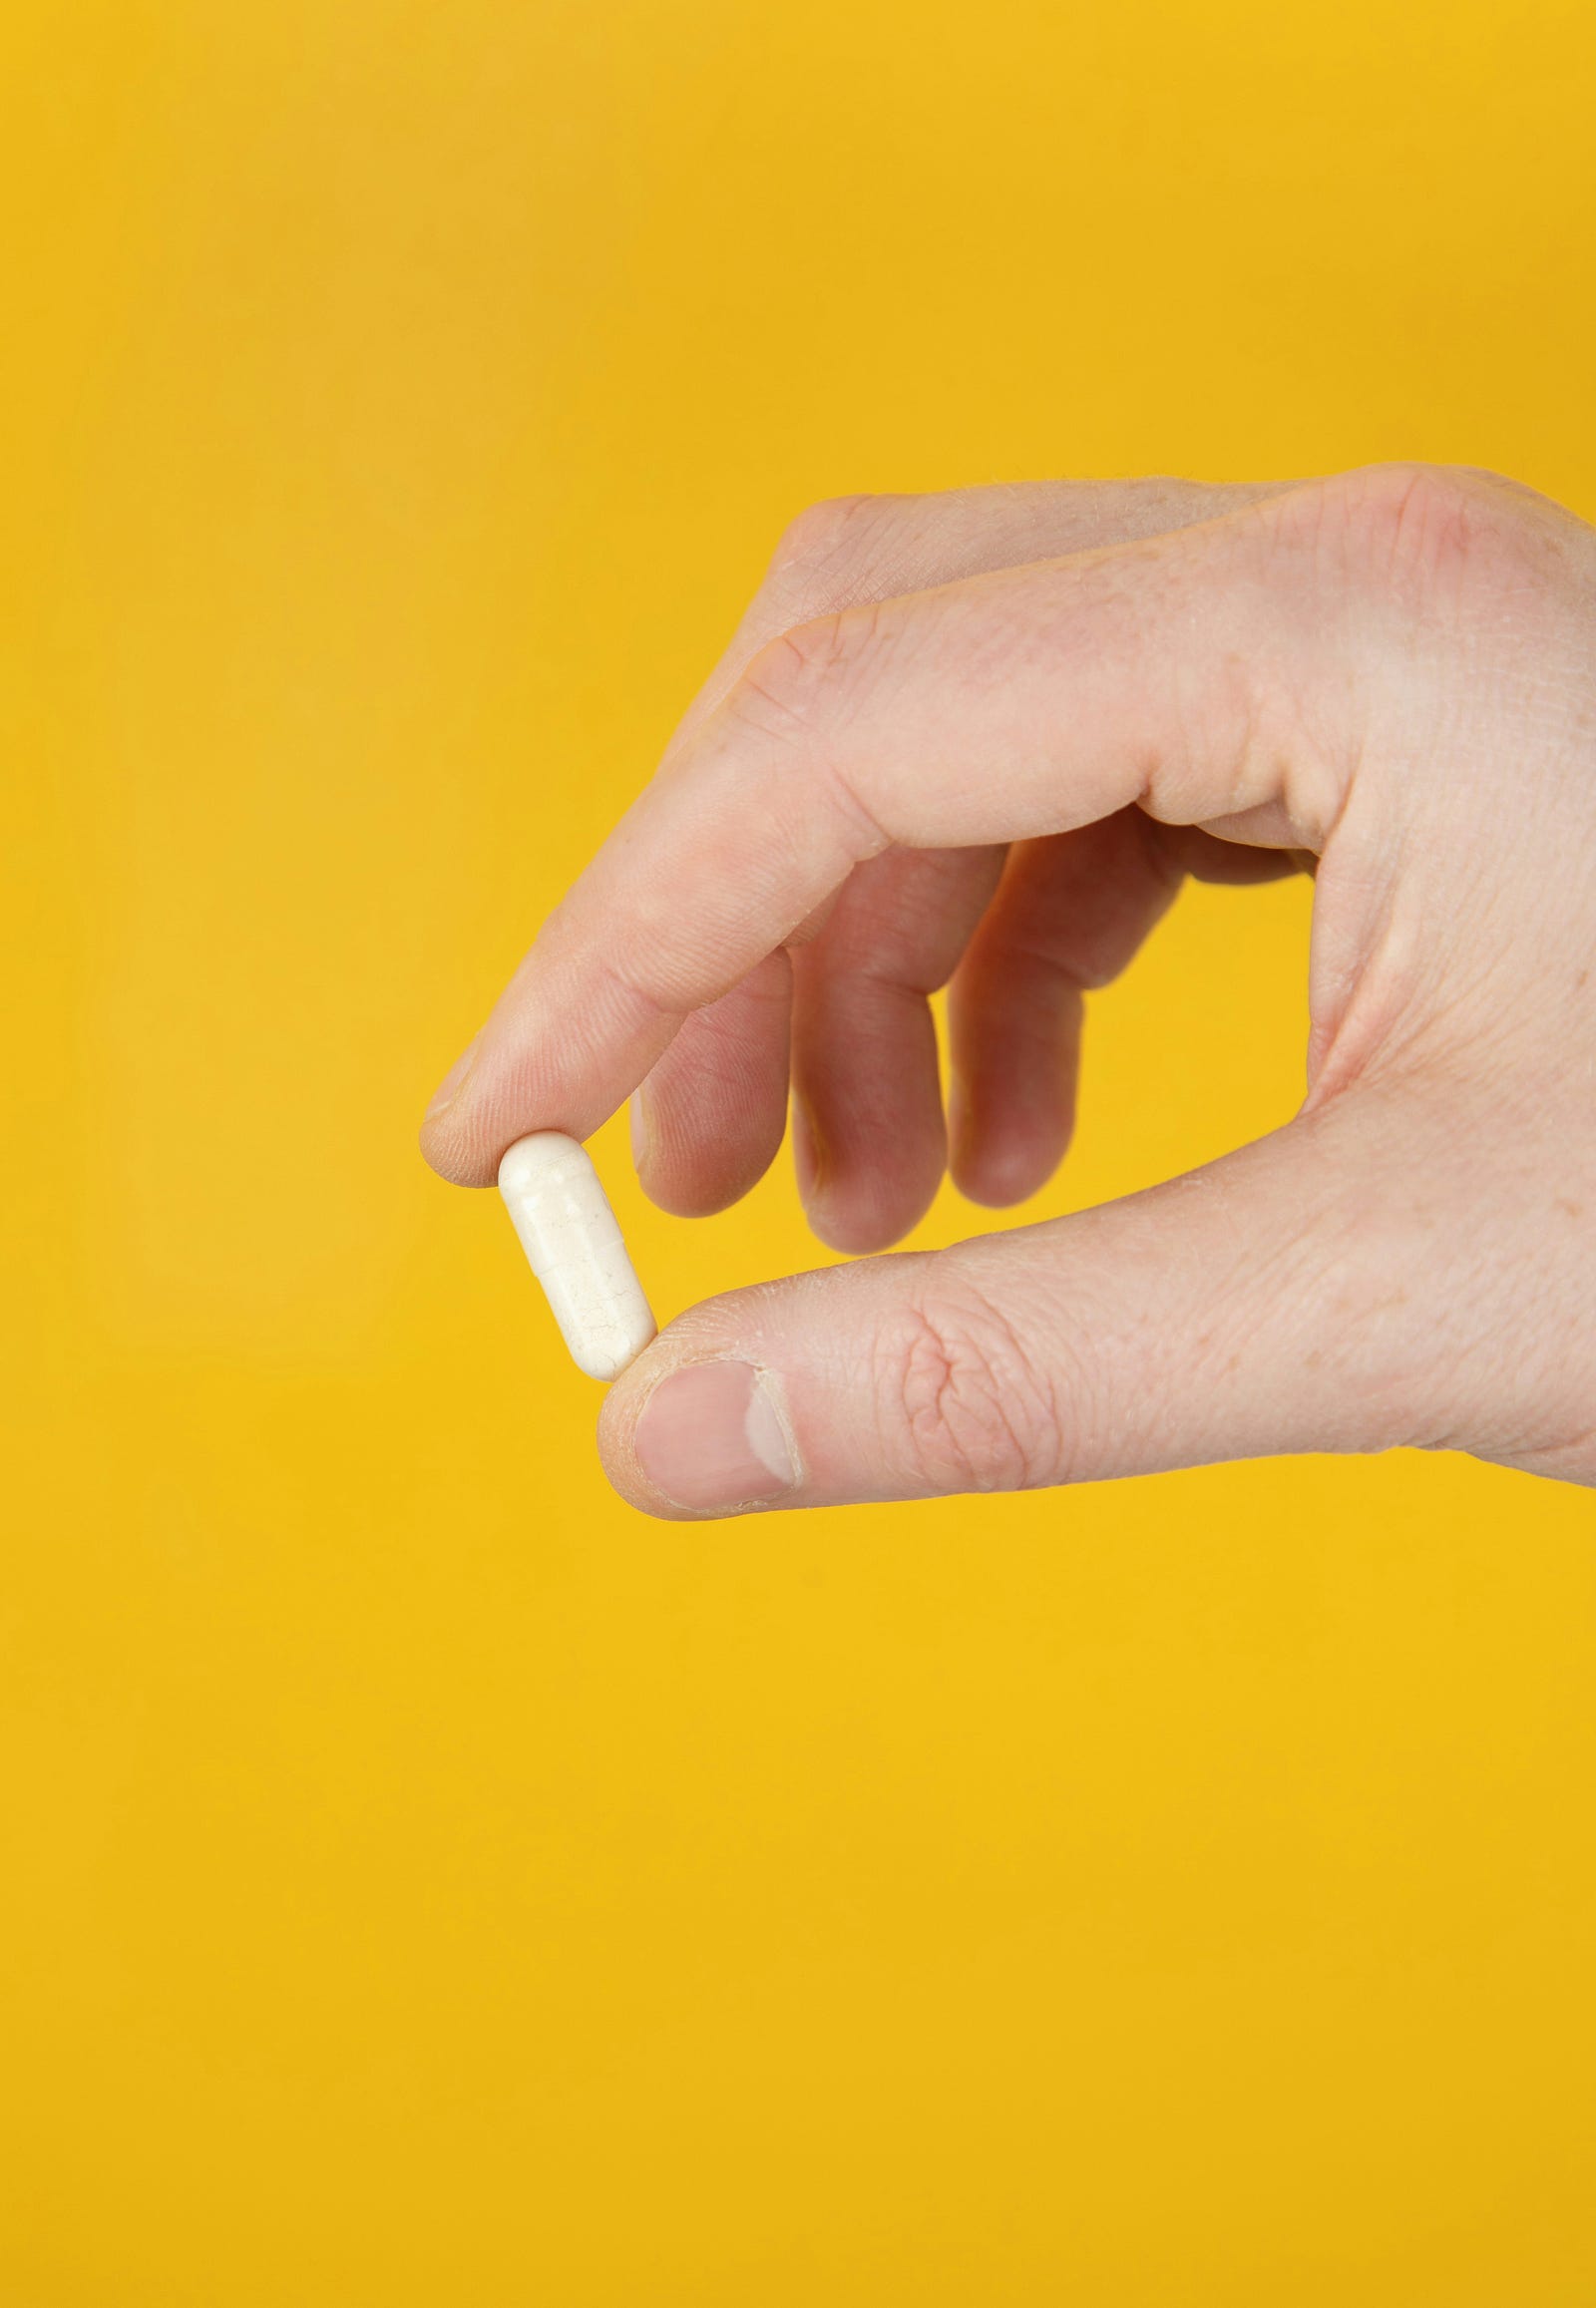 A hand extends from the right to hold a vitamin D pill.